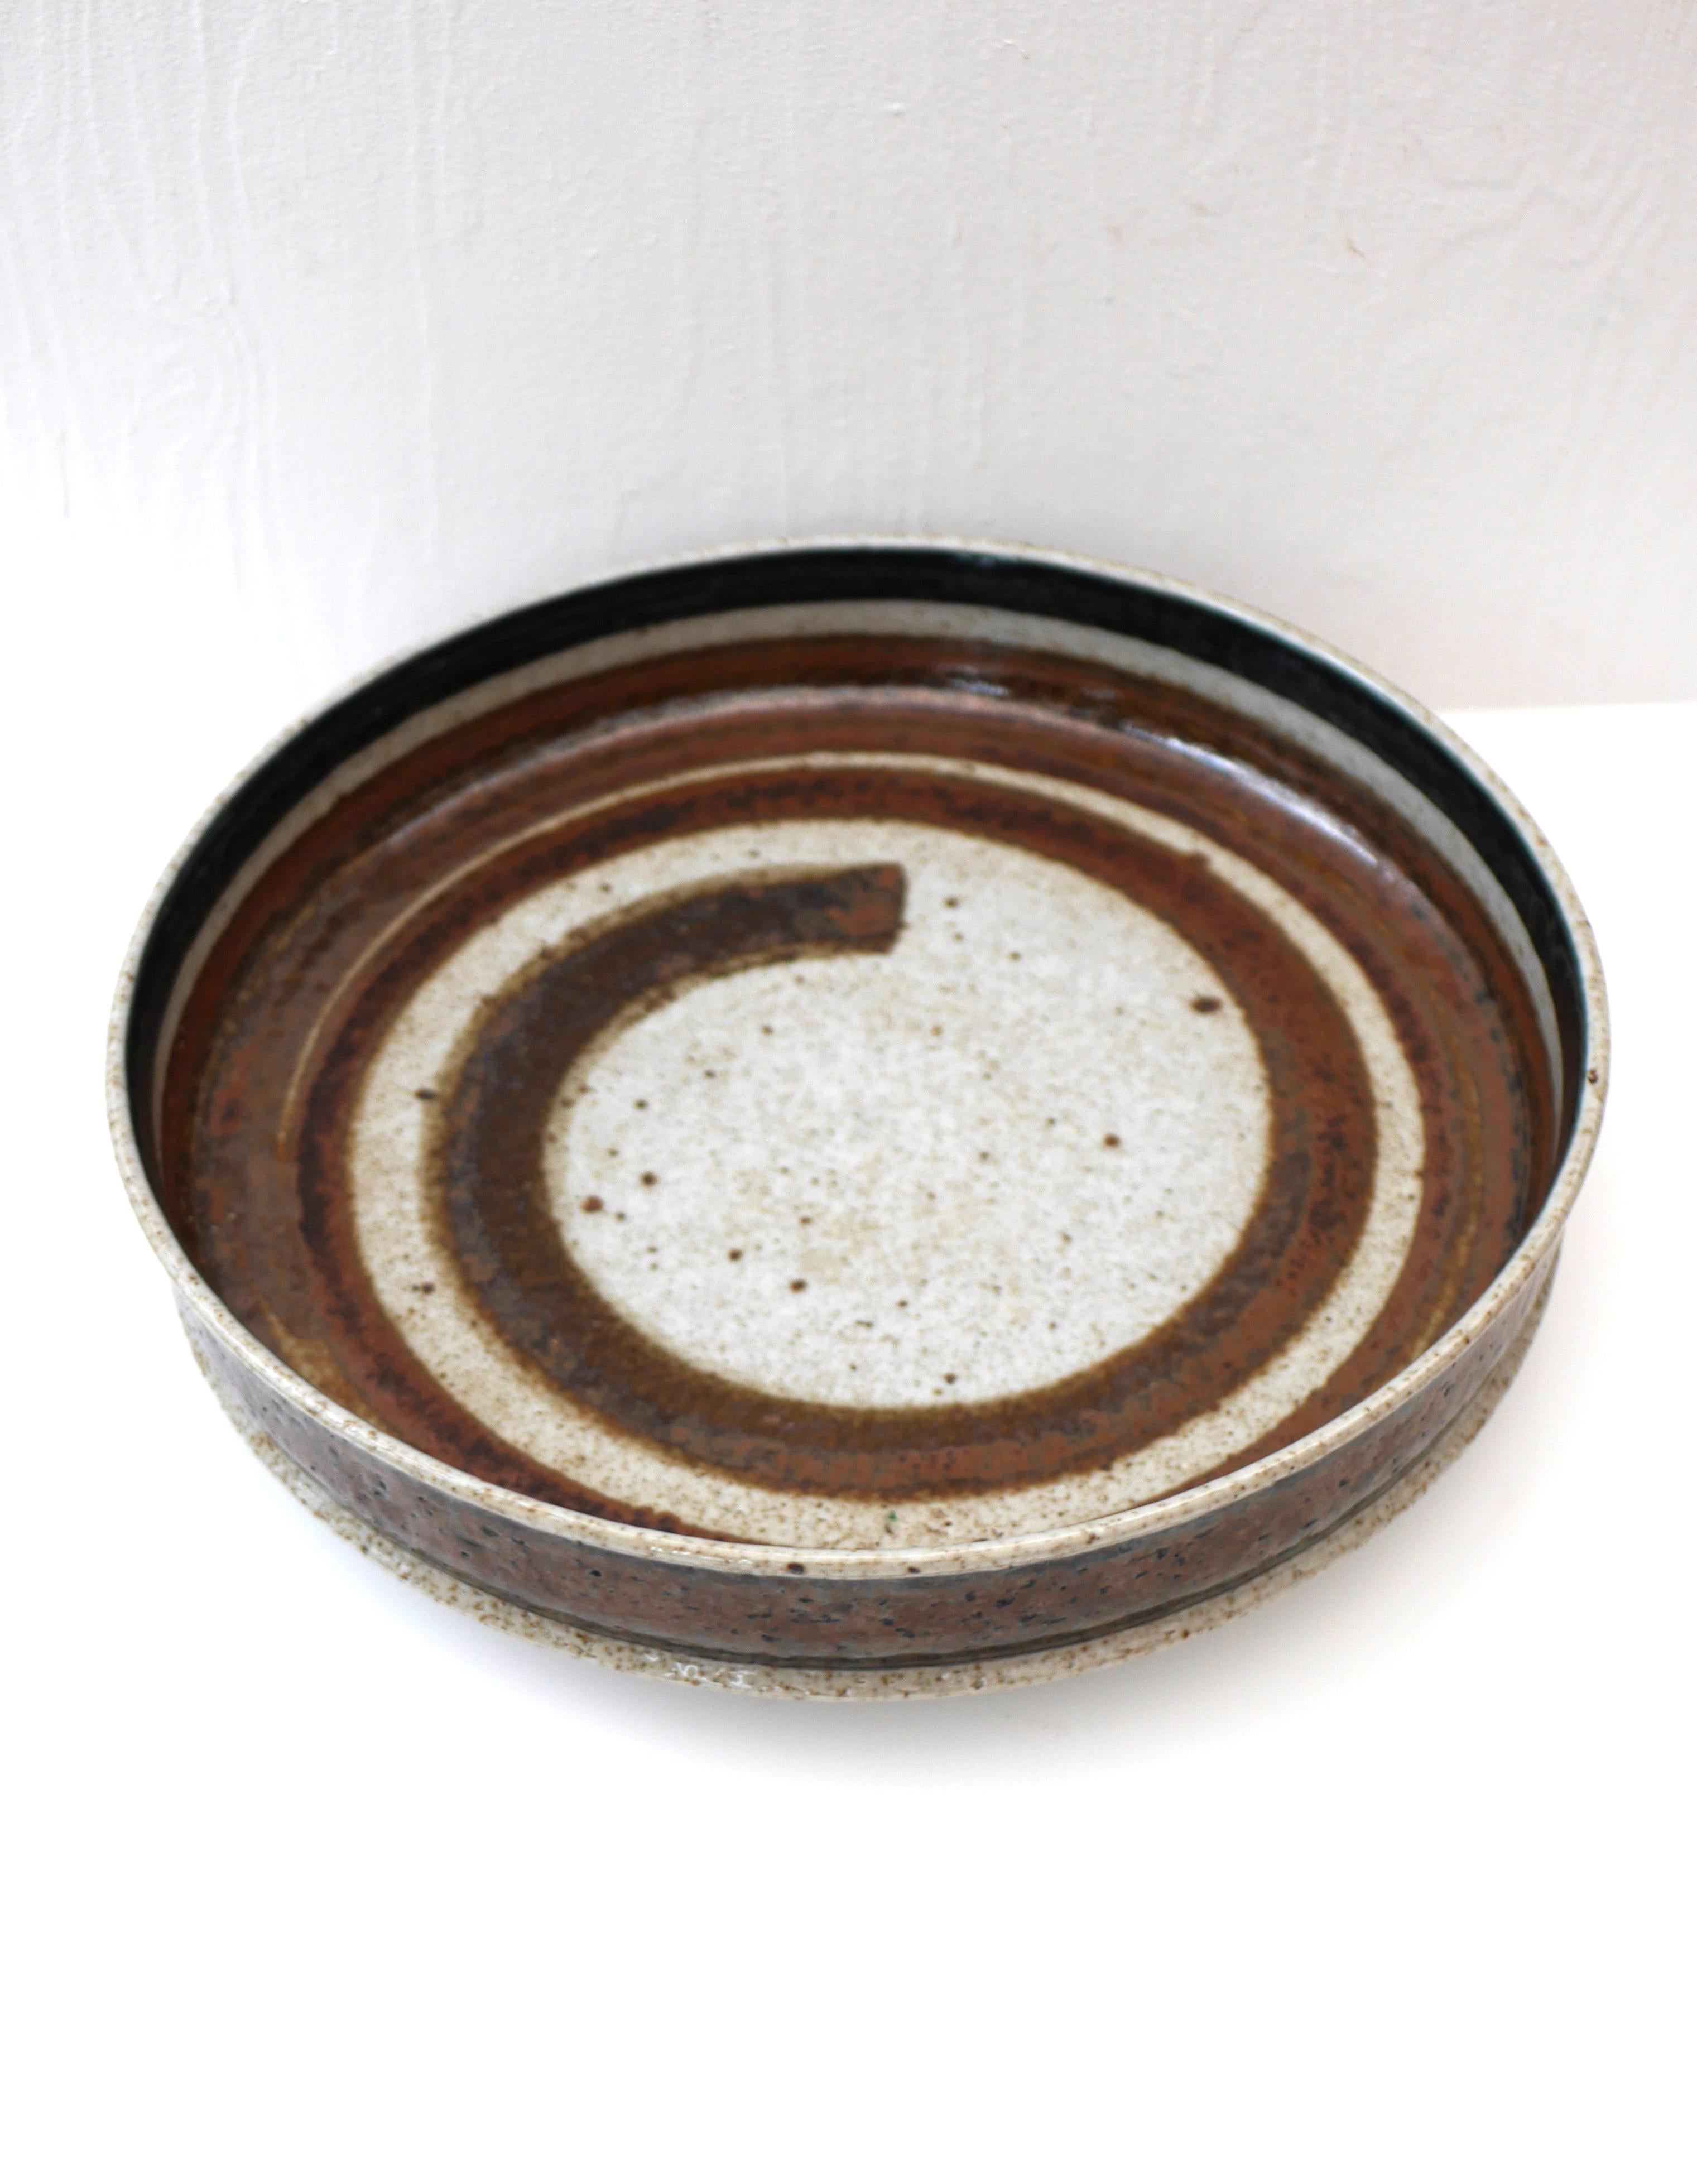 A signed abstract art ceramic plate made by Inger Persson for Rörstrand, Sweden. This is a studio production and has an unusual pattern and technique with a swirl in a warm brown colour very smooth inside within combination with a dark blue outside